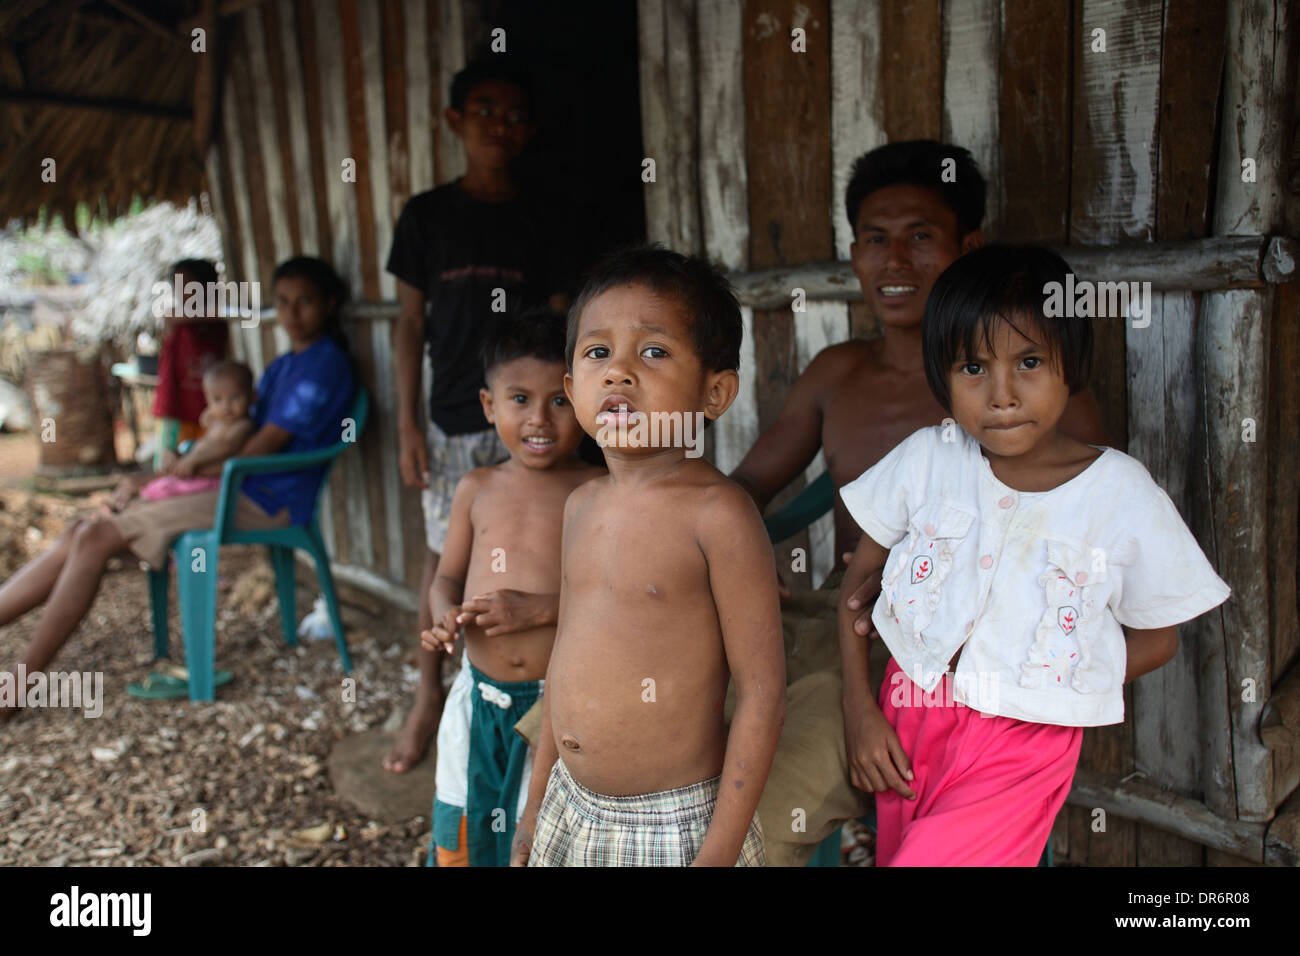 Portrait of Indonesian children from a family living in poverty.  Kupang, West Timor, Indonesia. Nov 2005 Stock Photo